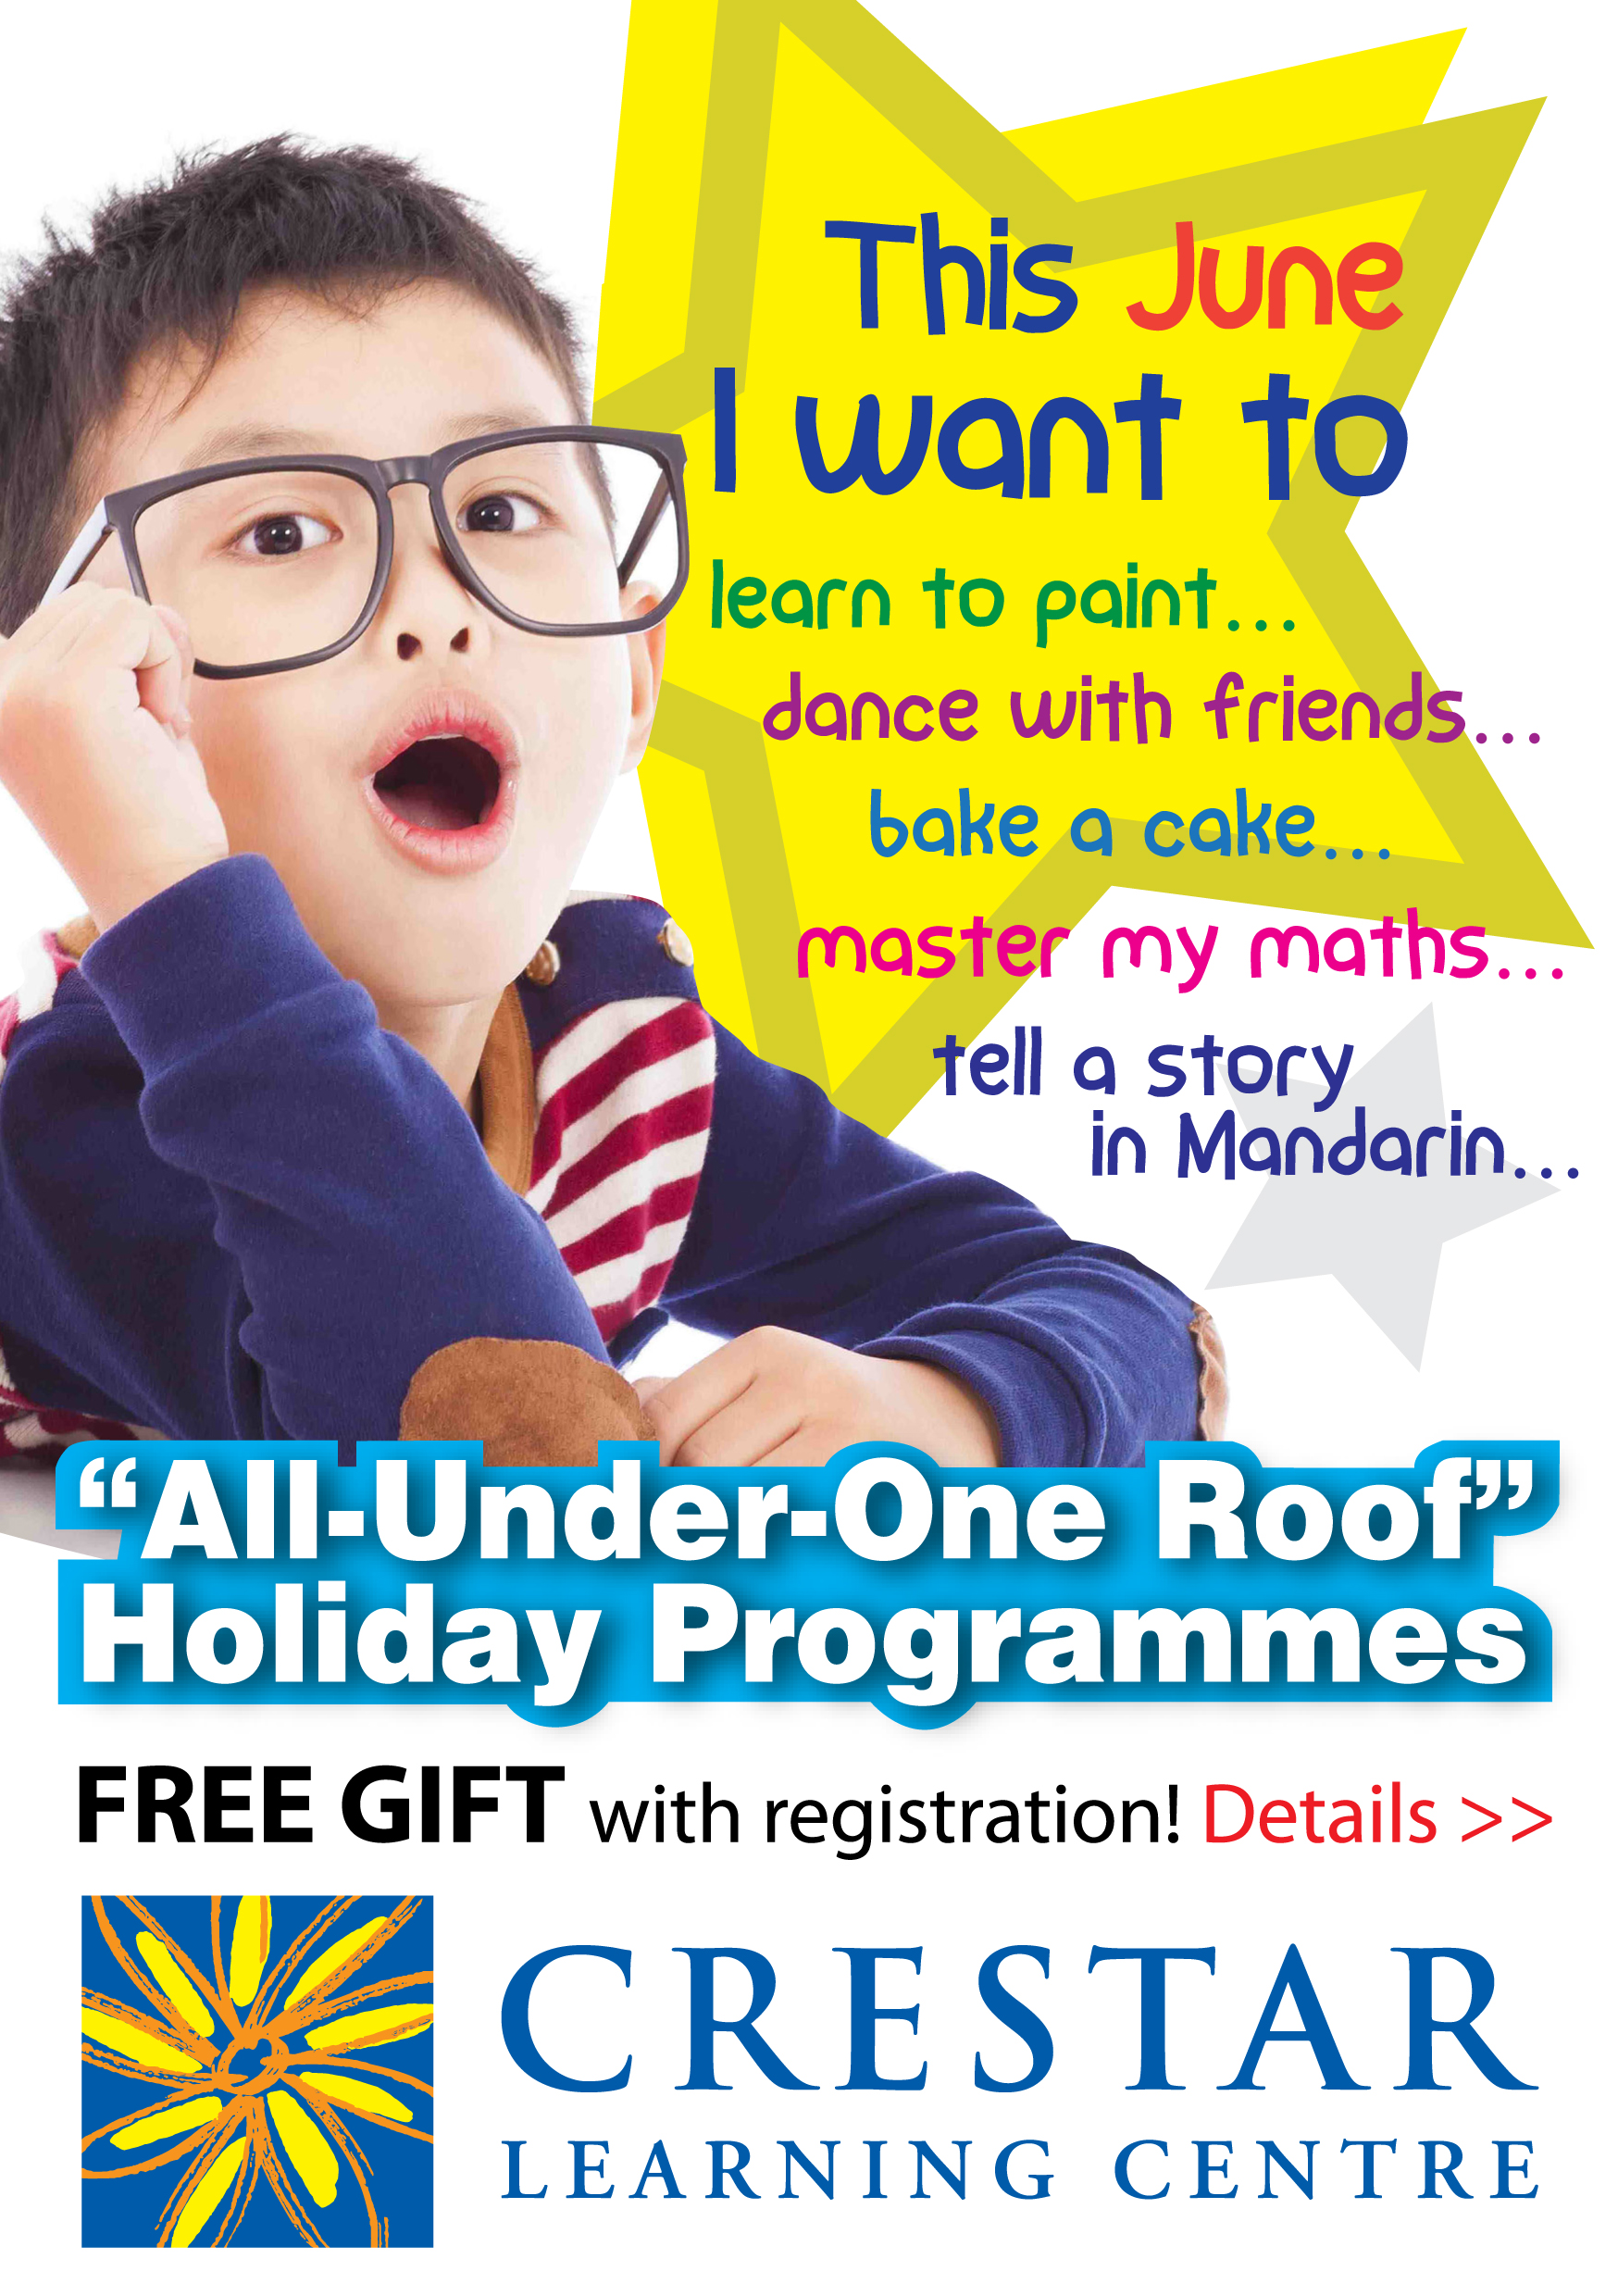 This June I want to learn to paint, dance with friends, bake  acake, master my maths, tell a story in Mandarin and more. Crestar Learning Centre 'All-Under-One Roof' Holiday Programmes. Free Gift with registation. Visit us via http://crestar.com.sg/index.php/holiday-program for more information.